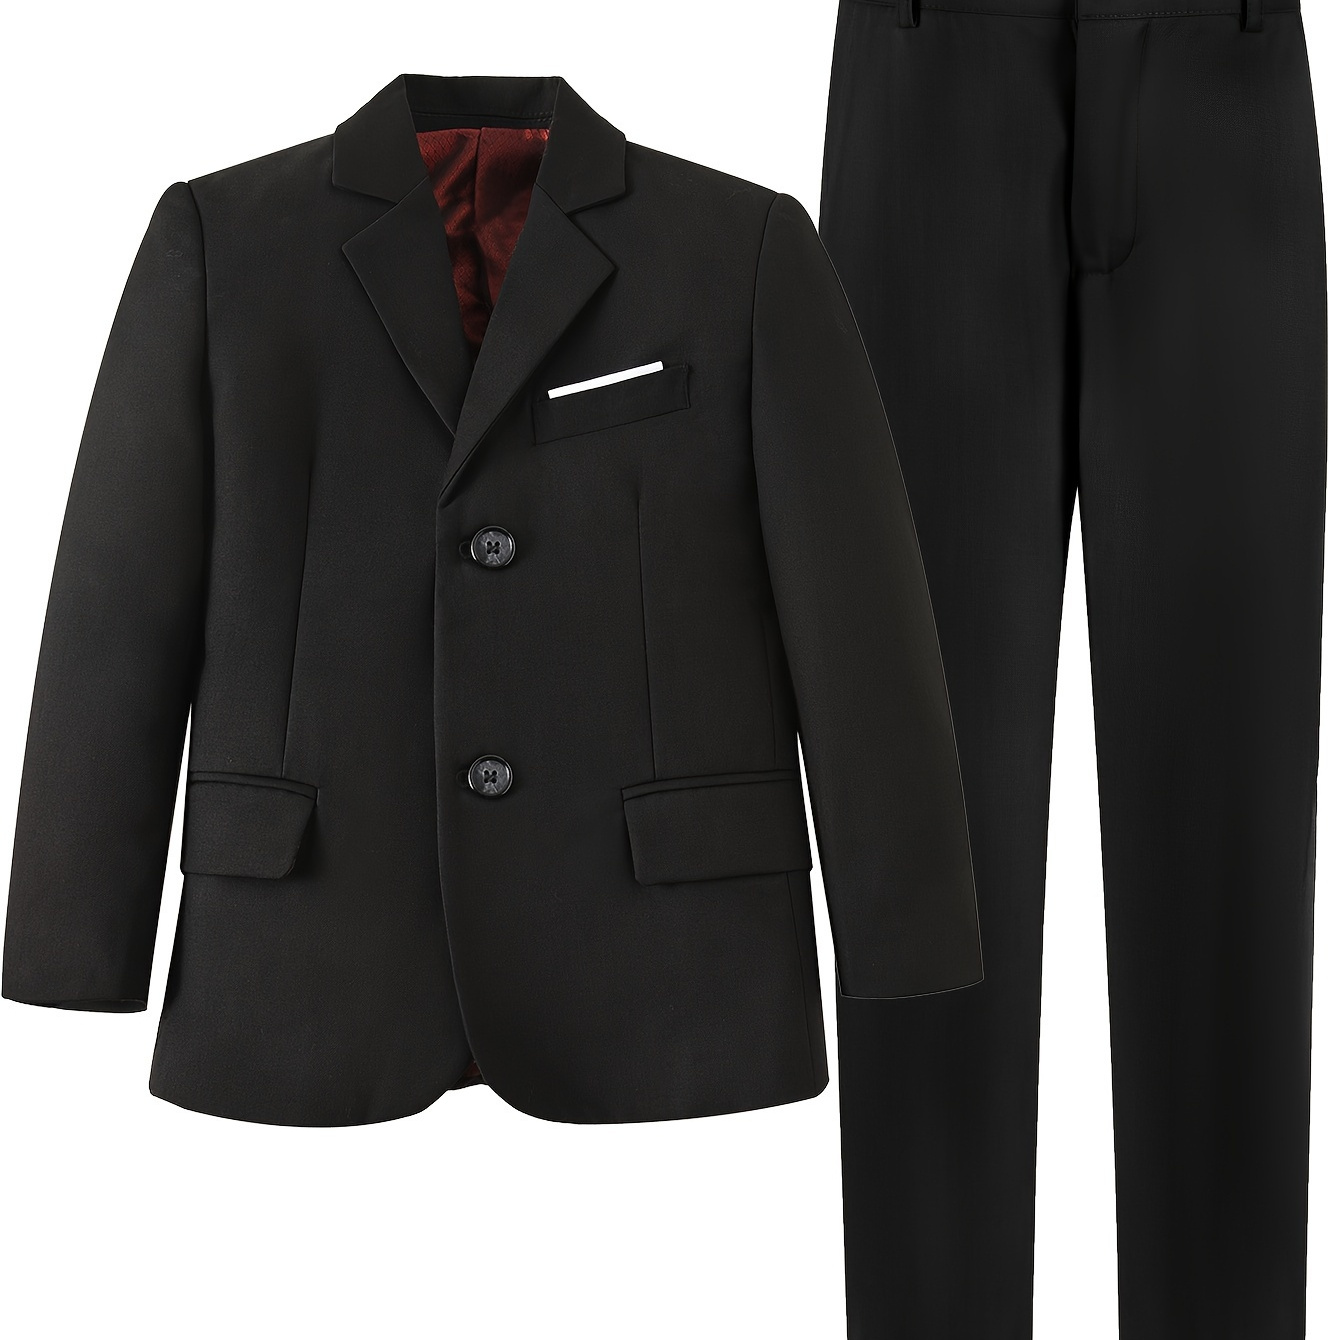 

2pcs Boy's Gentleman Outfit, Suit Jacket & Pants Set, Formal Wear For Speech Performance Birthday Party, Kid's Clothes